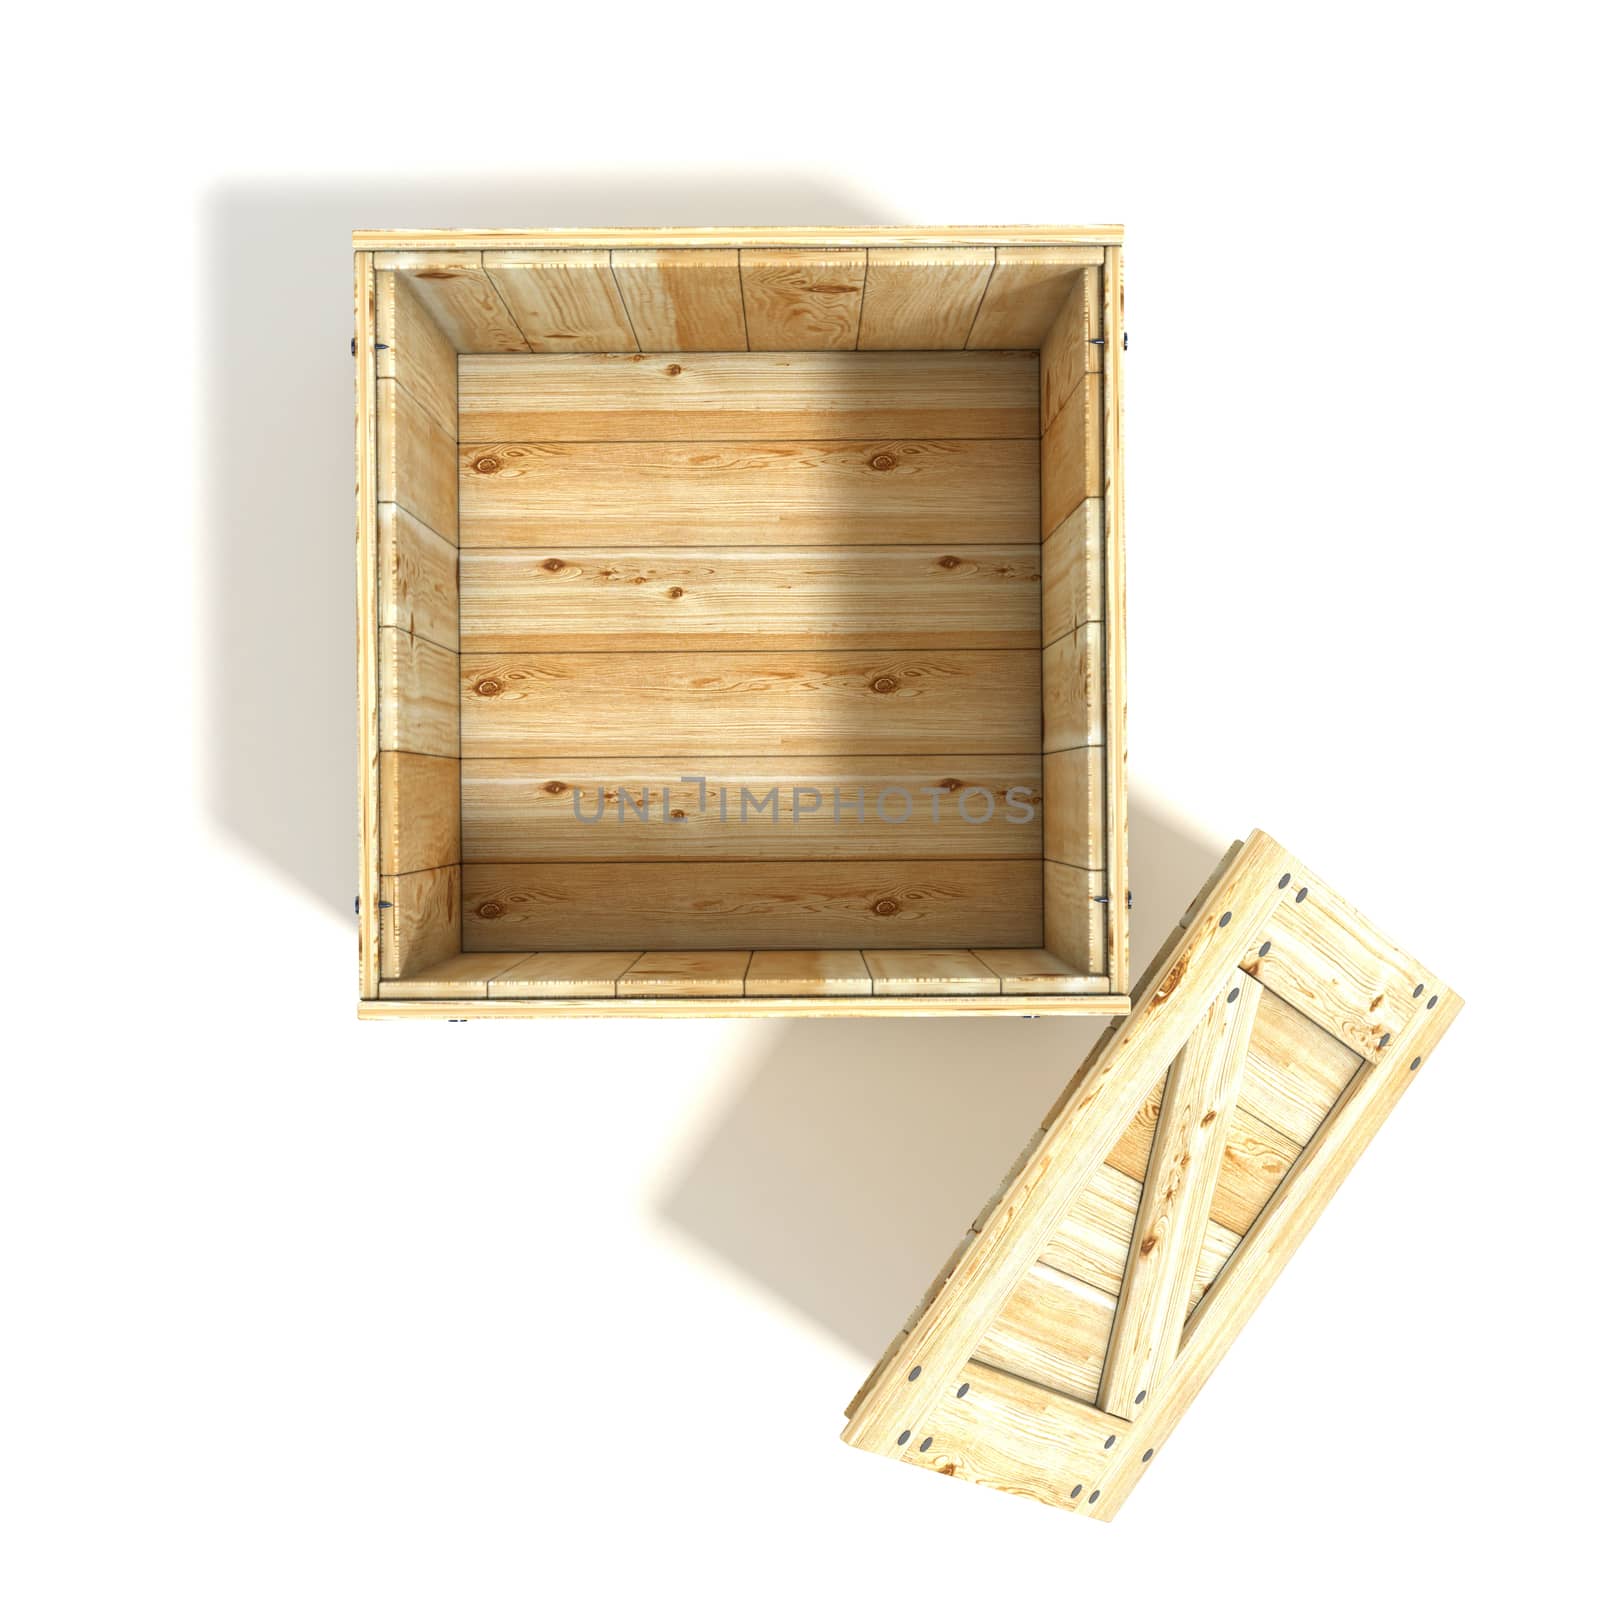 Opened wooden crate. Top view. 3D render illustration isolated on a white background